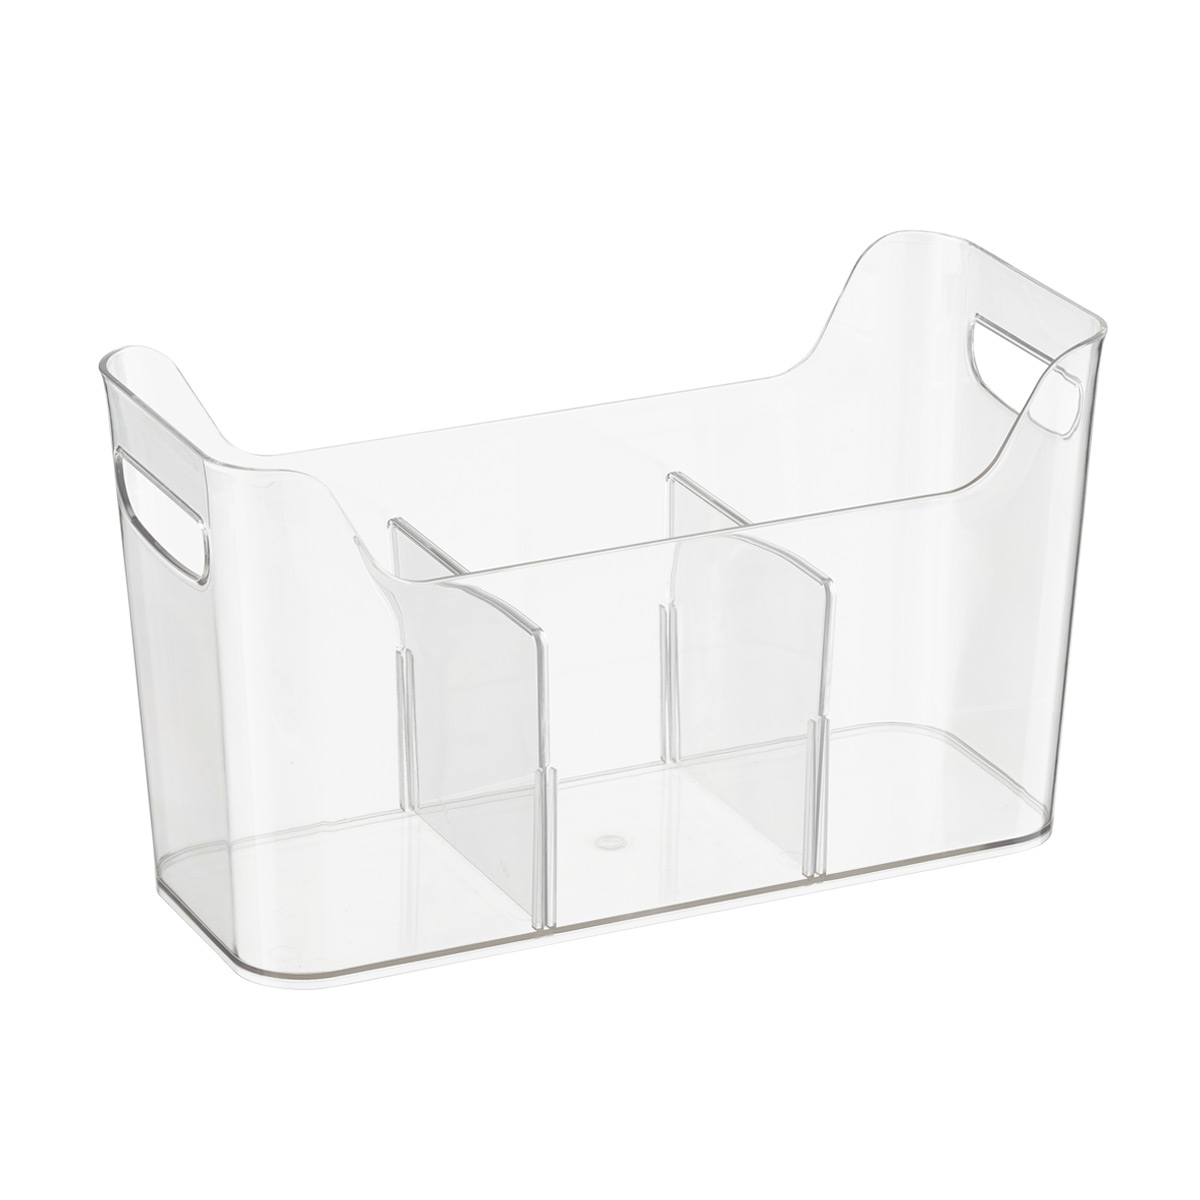 https://www.containerstore.com/catalogimages/362301/10076999-divided-freezer-bin-clear-n.jpg